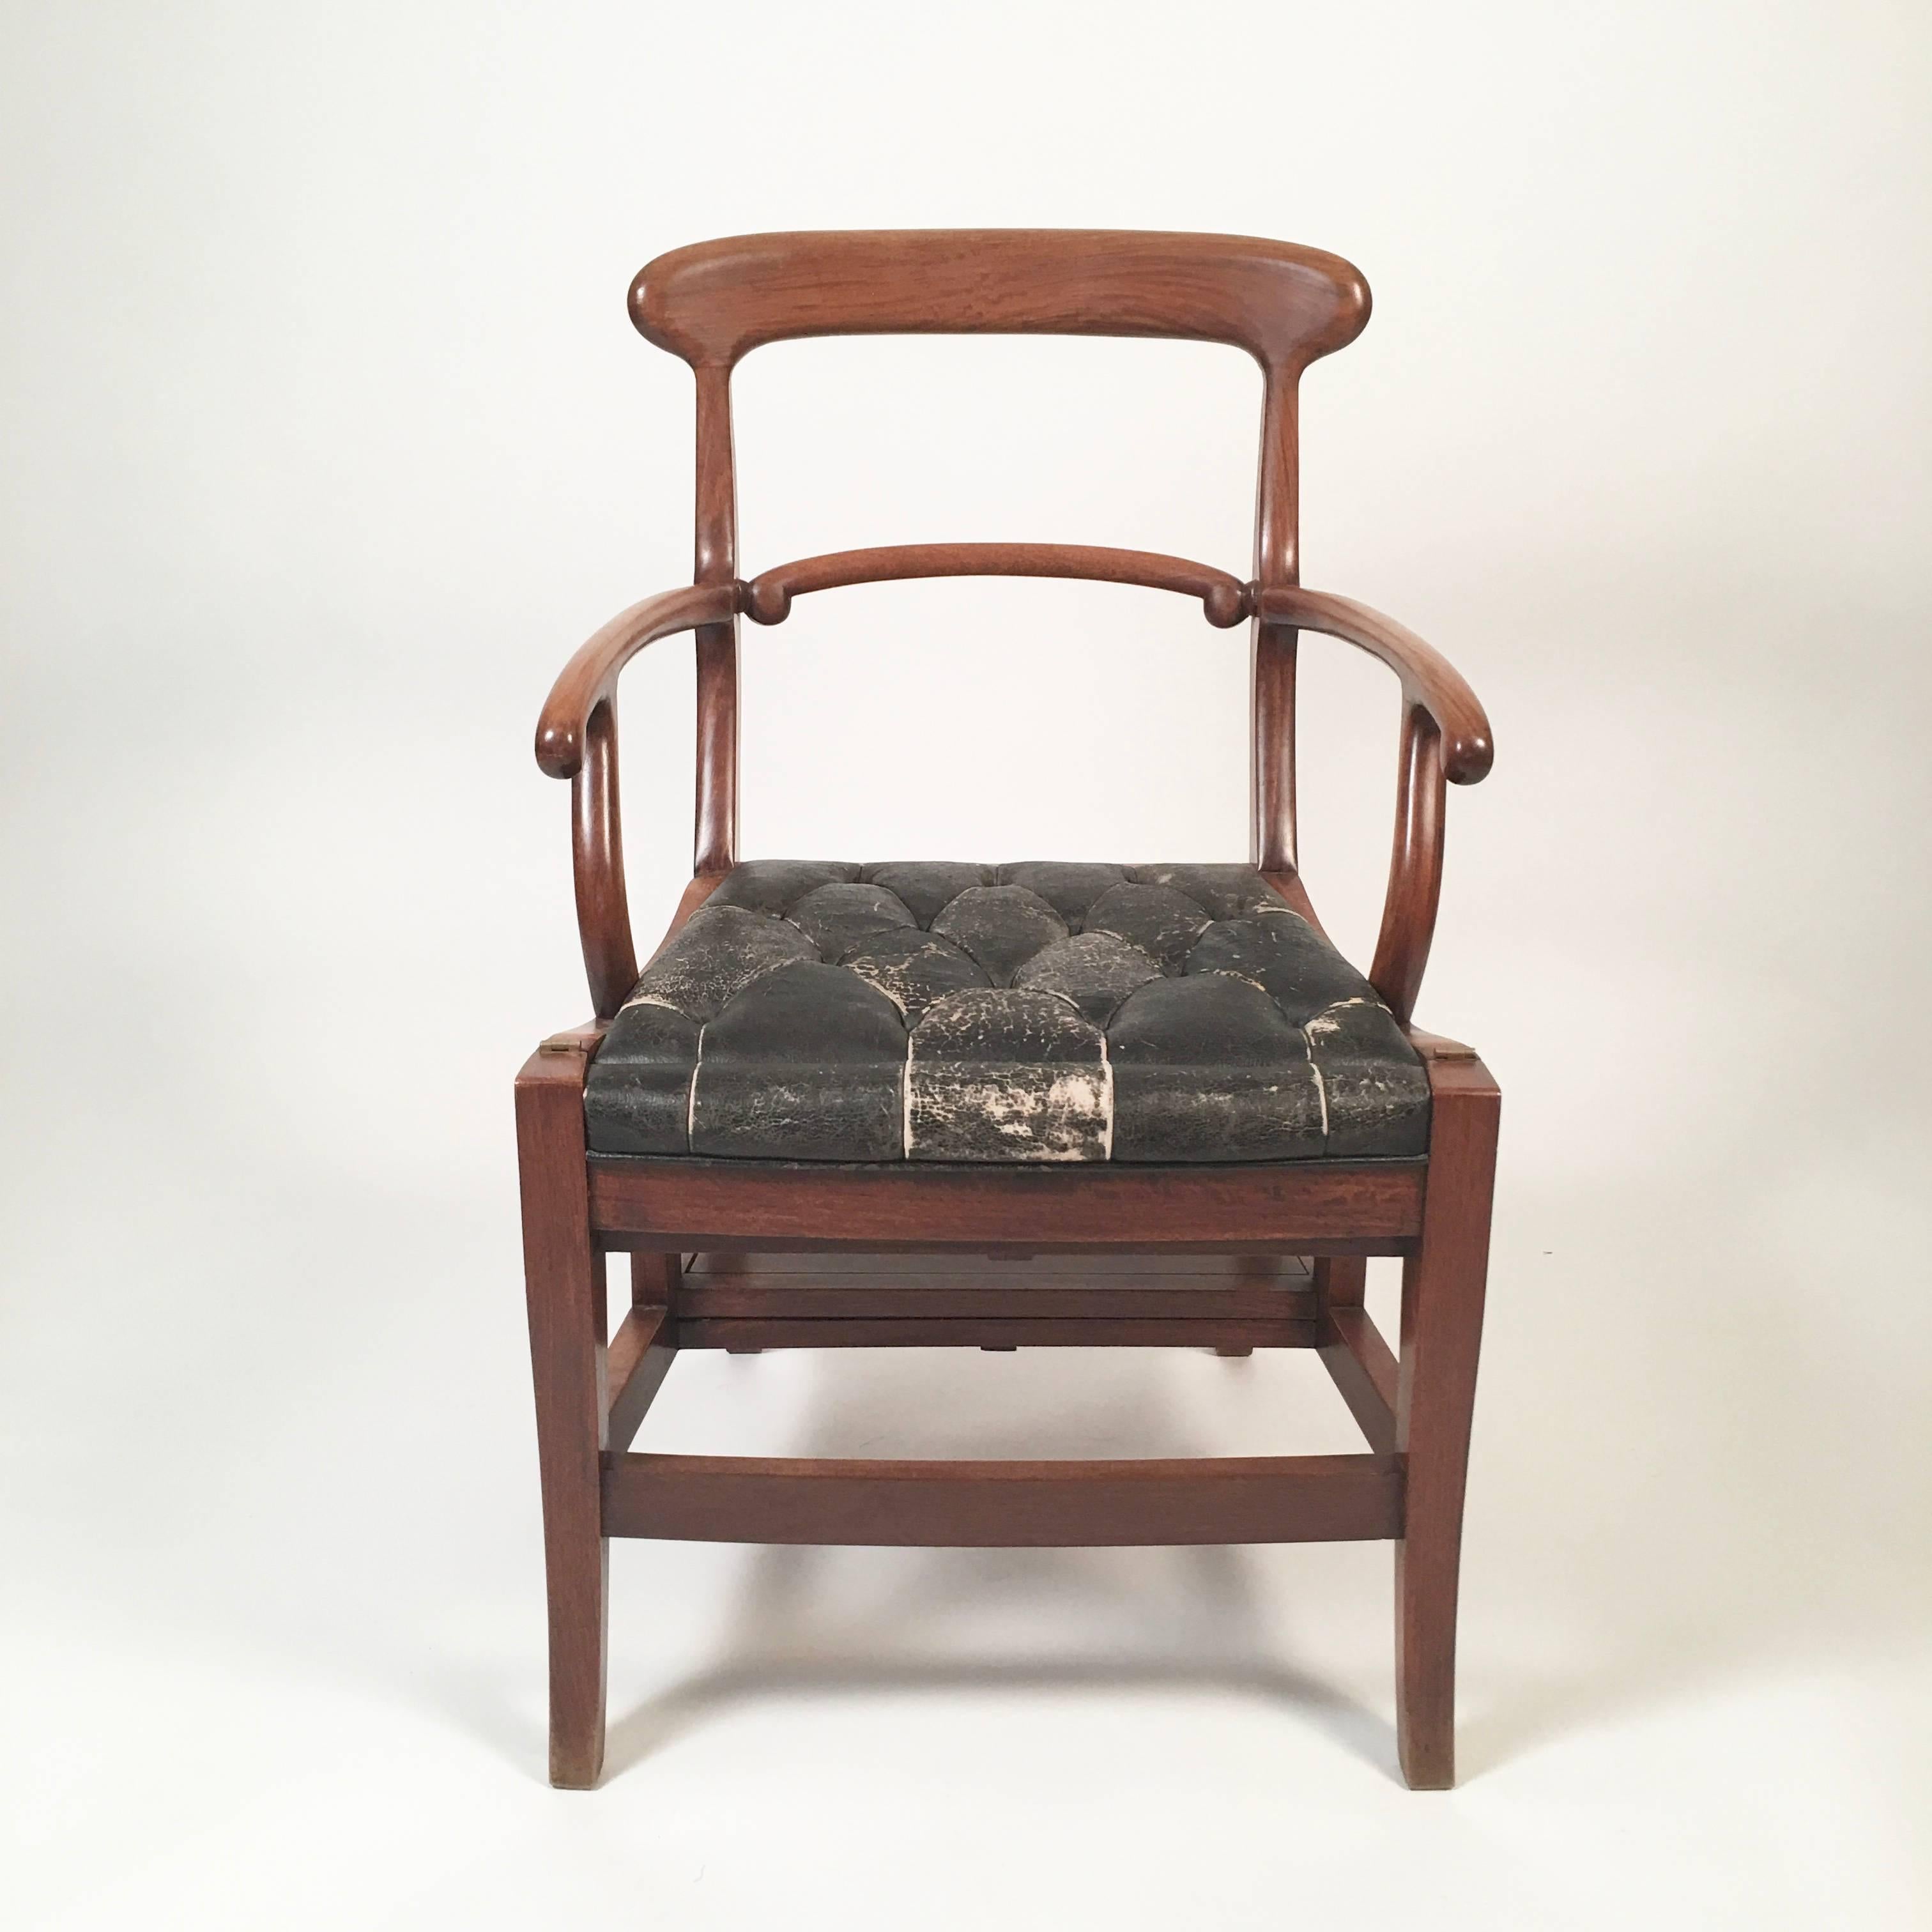 A beautifully made chair which converts into library steps, also known as a metamorphic chair, in solid teak with a tufted leather seat. This example of Dual use furniture, after an English Regency example, dates to, circa 1910 and is Chinese